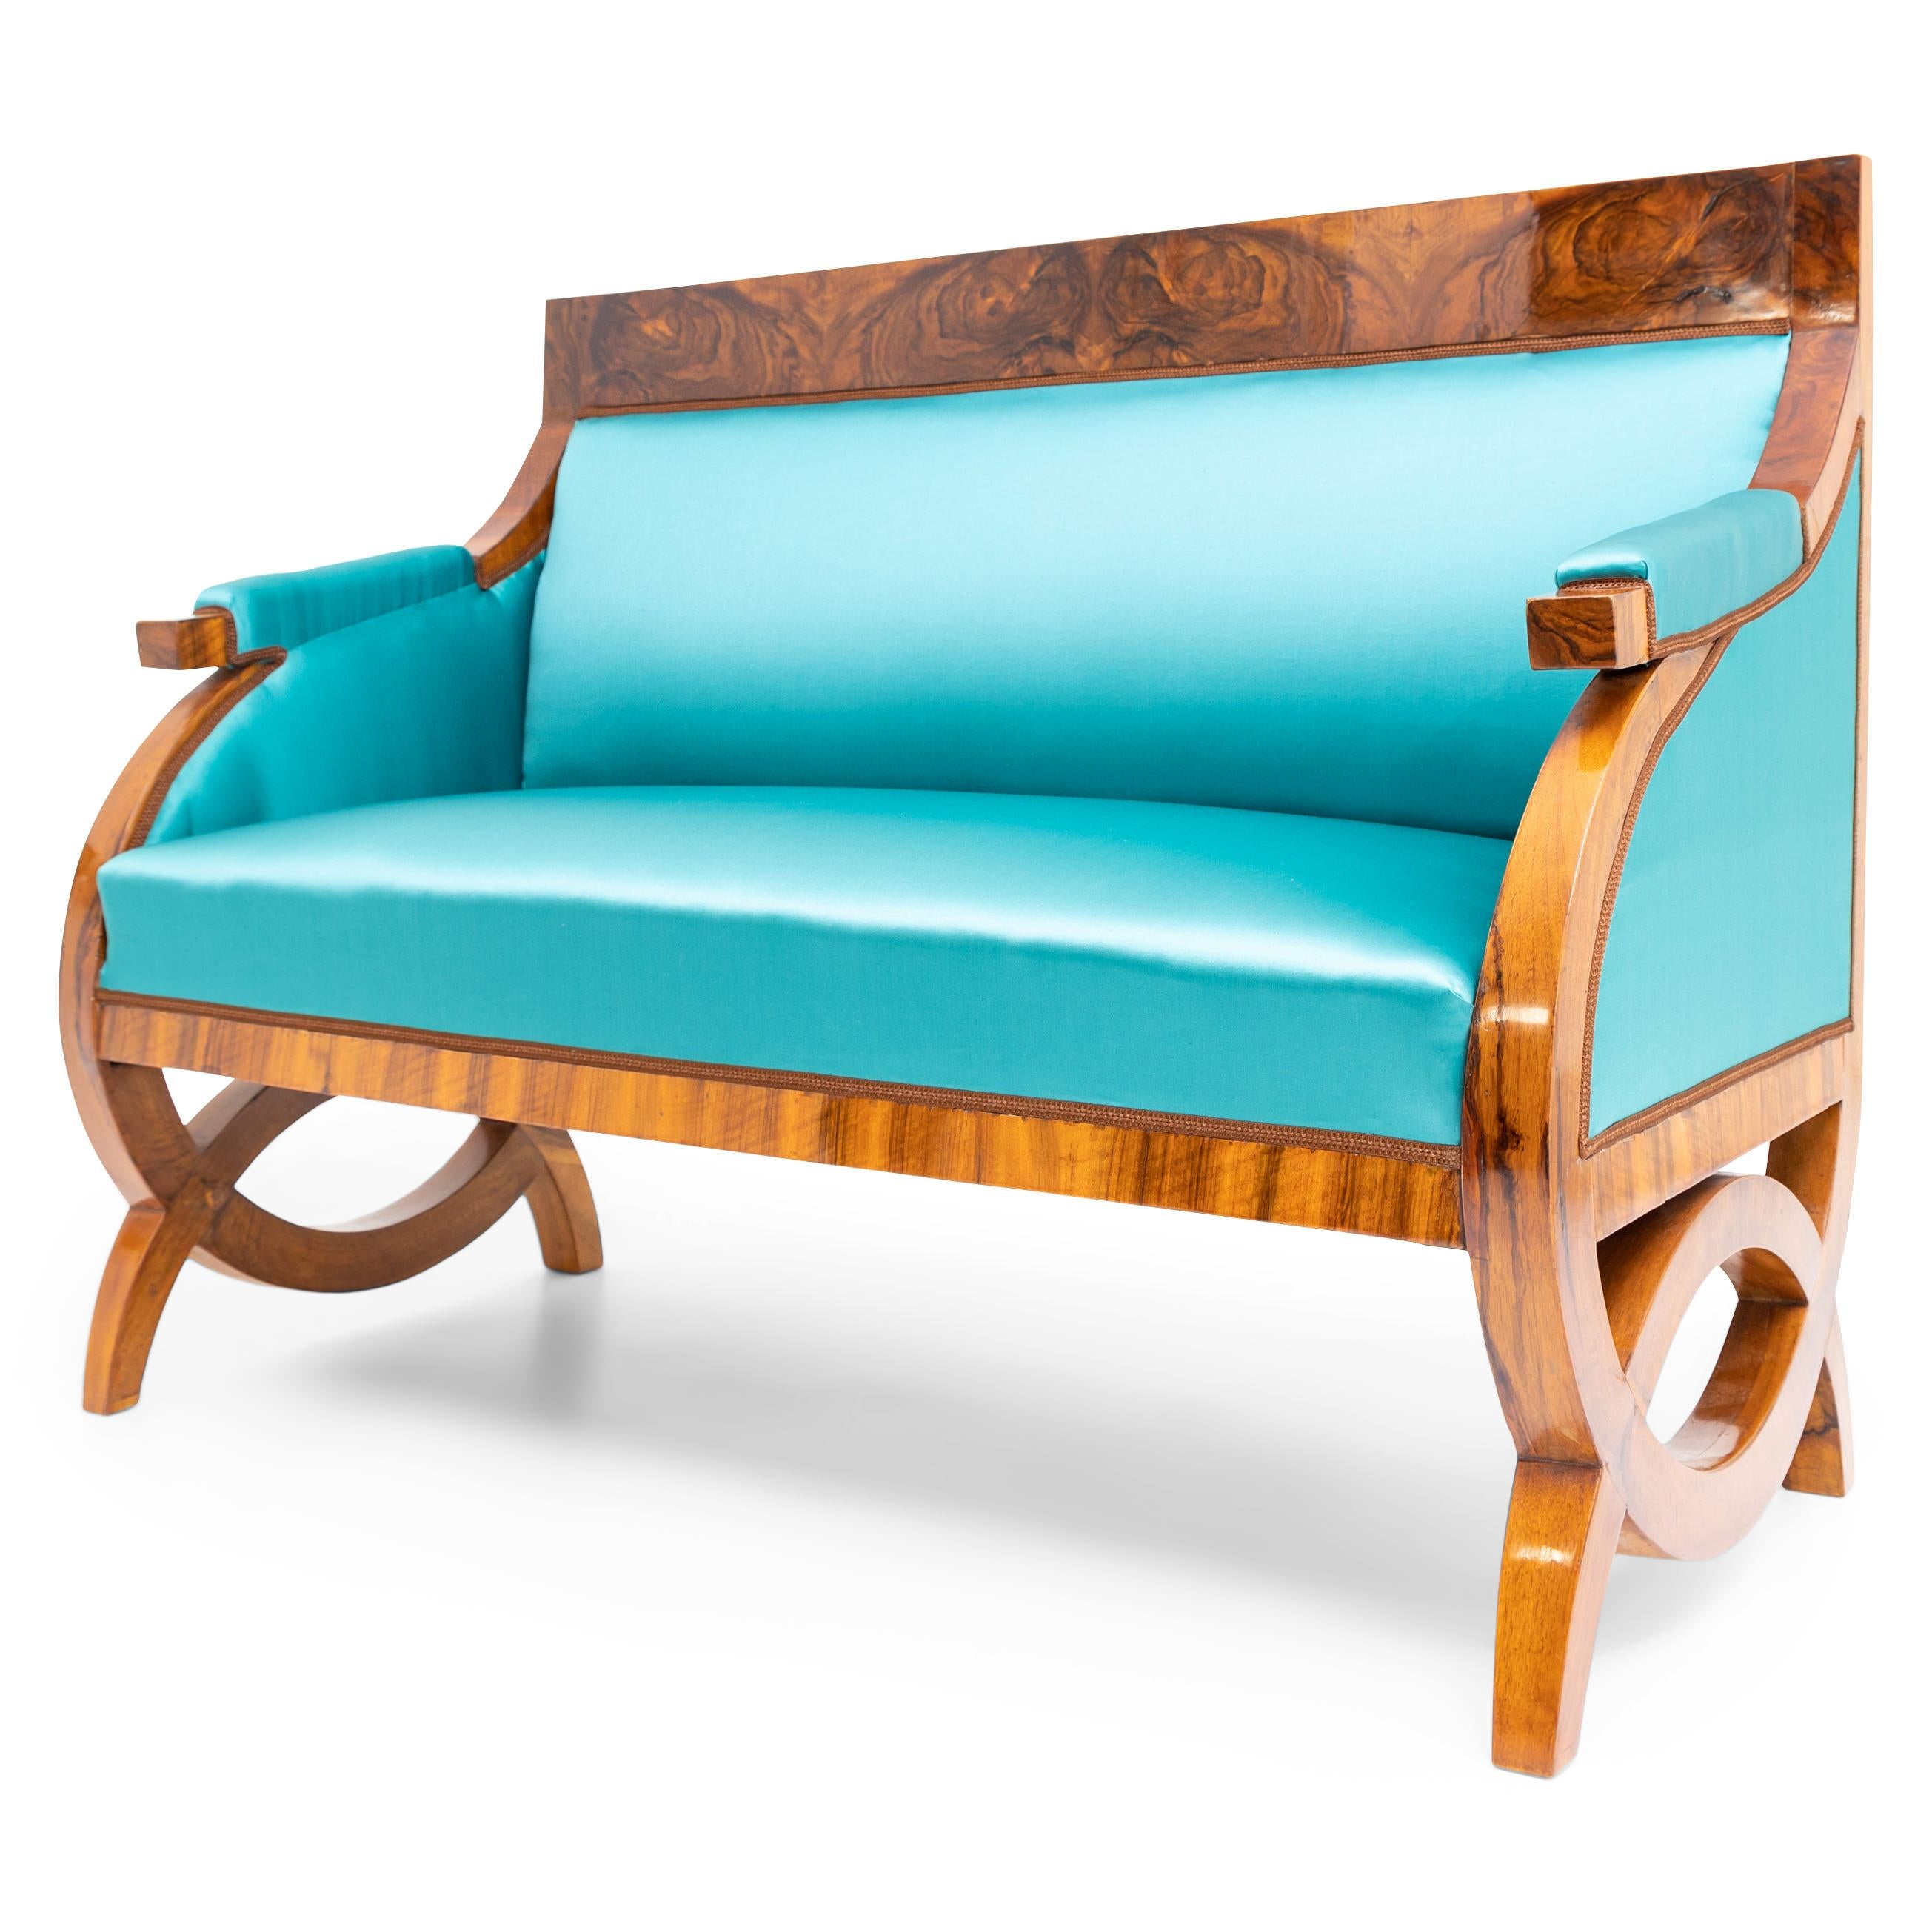 Biedermeier sofa on segment-shaped legs with rounded side parts, short armrests and backrest with straight burl wood veneered top. The sofa is newly covered with a light blue satin fabric. Solid and veneered walnut. Hand polished, restored condition.